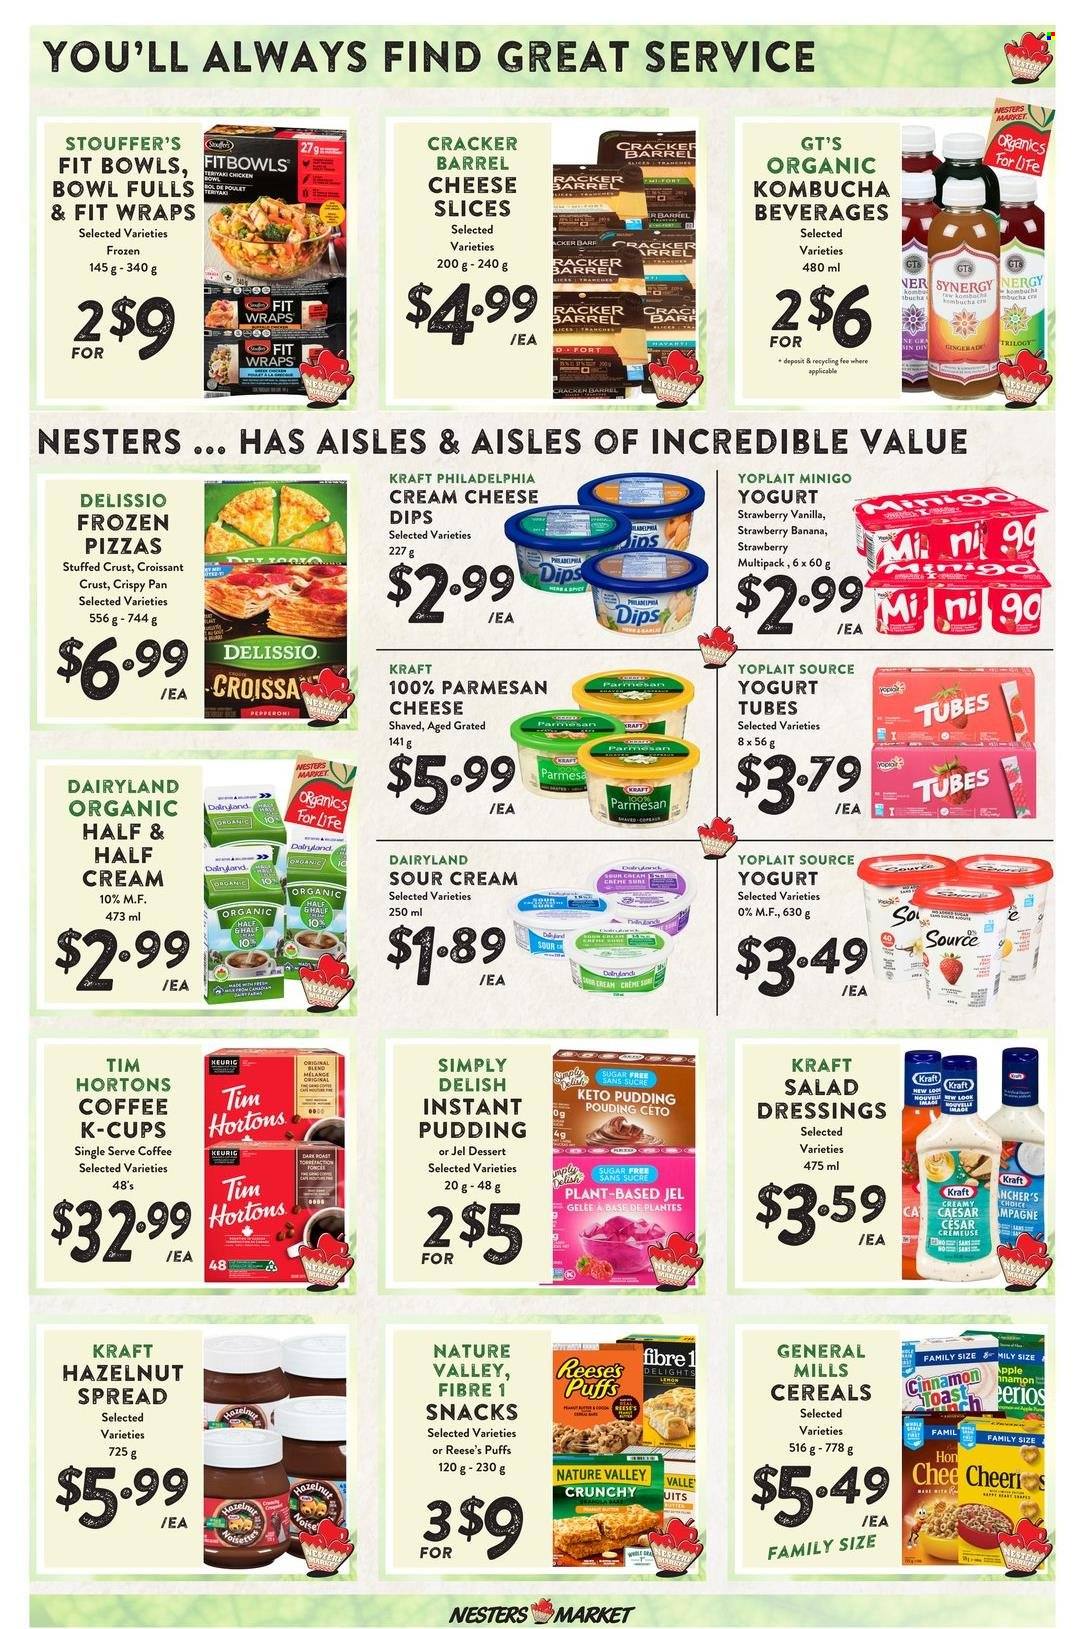 thumbnail - Nesters Food Market Flyer - January 26, 2023 - February 01, 2023 - Sales products - croissant, wraps, puffs, pizza, Kraft®, pepperoni, sliced cheese, parmesan, cheese, pudding, yoghurt, Yoplait, sour cream, Reese's, Stouffer's, snack, crackers, cereals, Cheerios, Nature Valley, cinnamon, salad dressing, hazelnut spread, kombucha, coffee, coffee capsules, K-Cups, Keurig, Half and half, Philadelphia. Page 4.